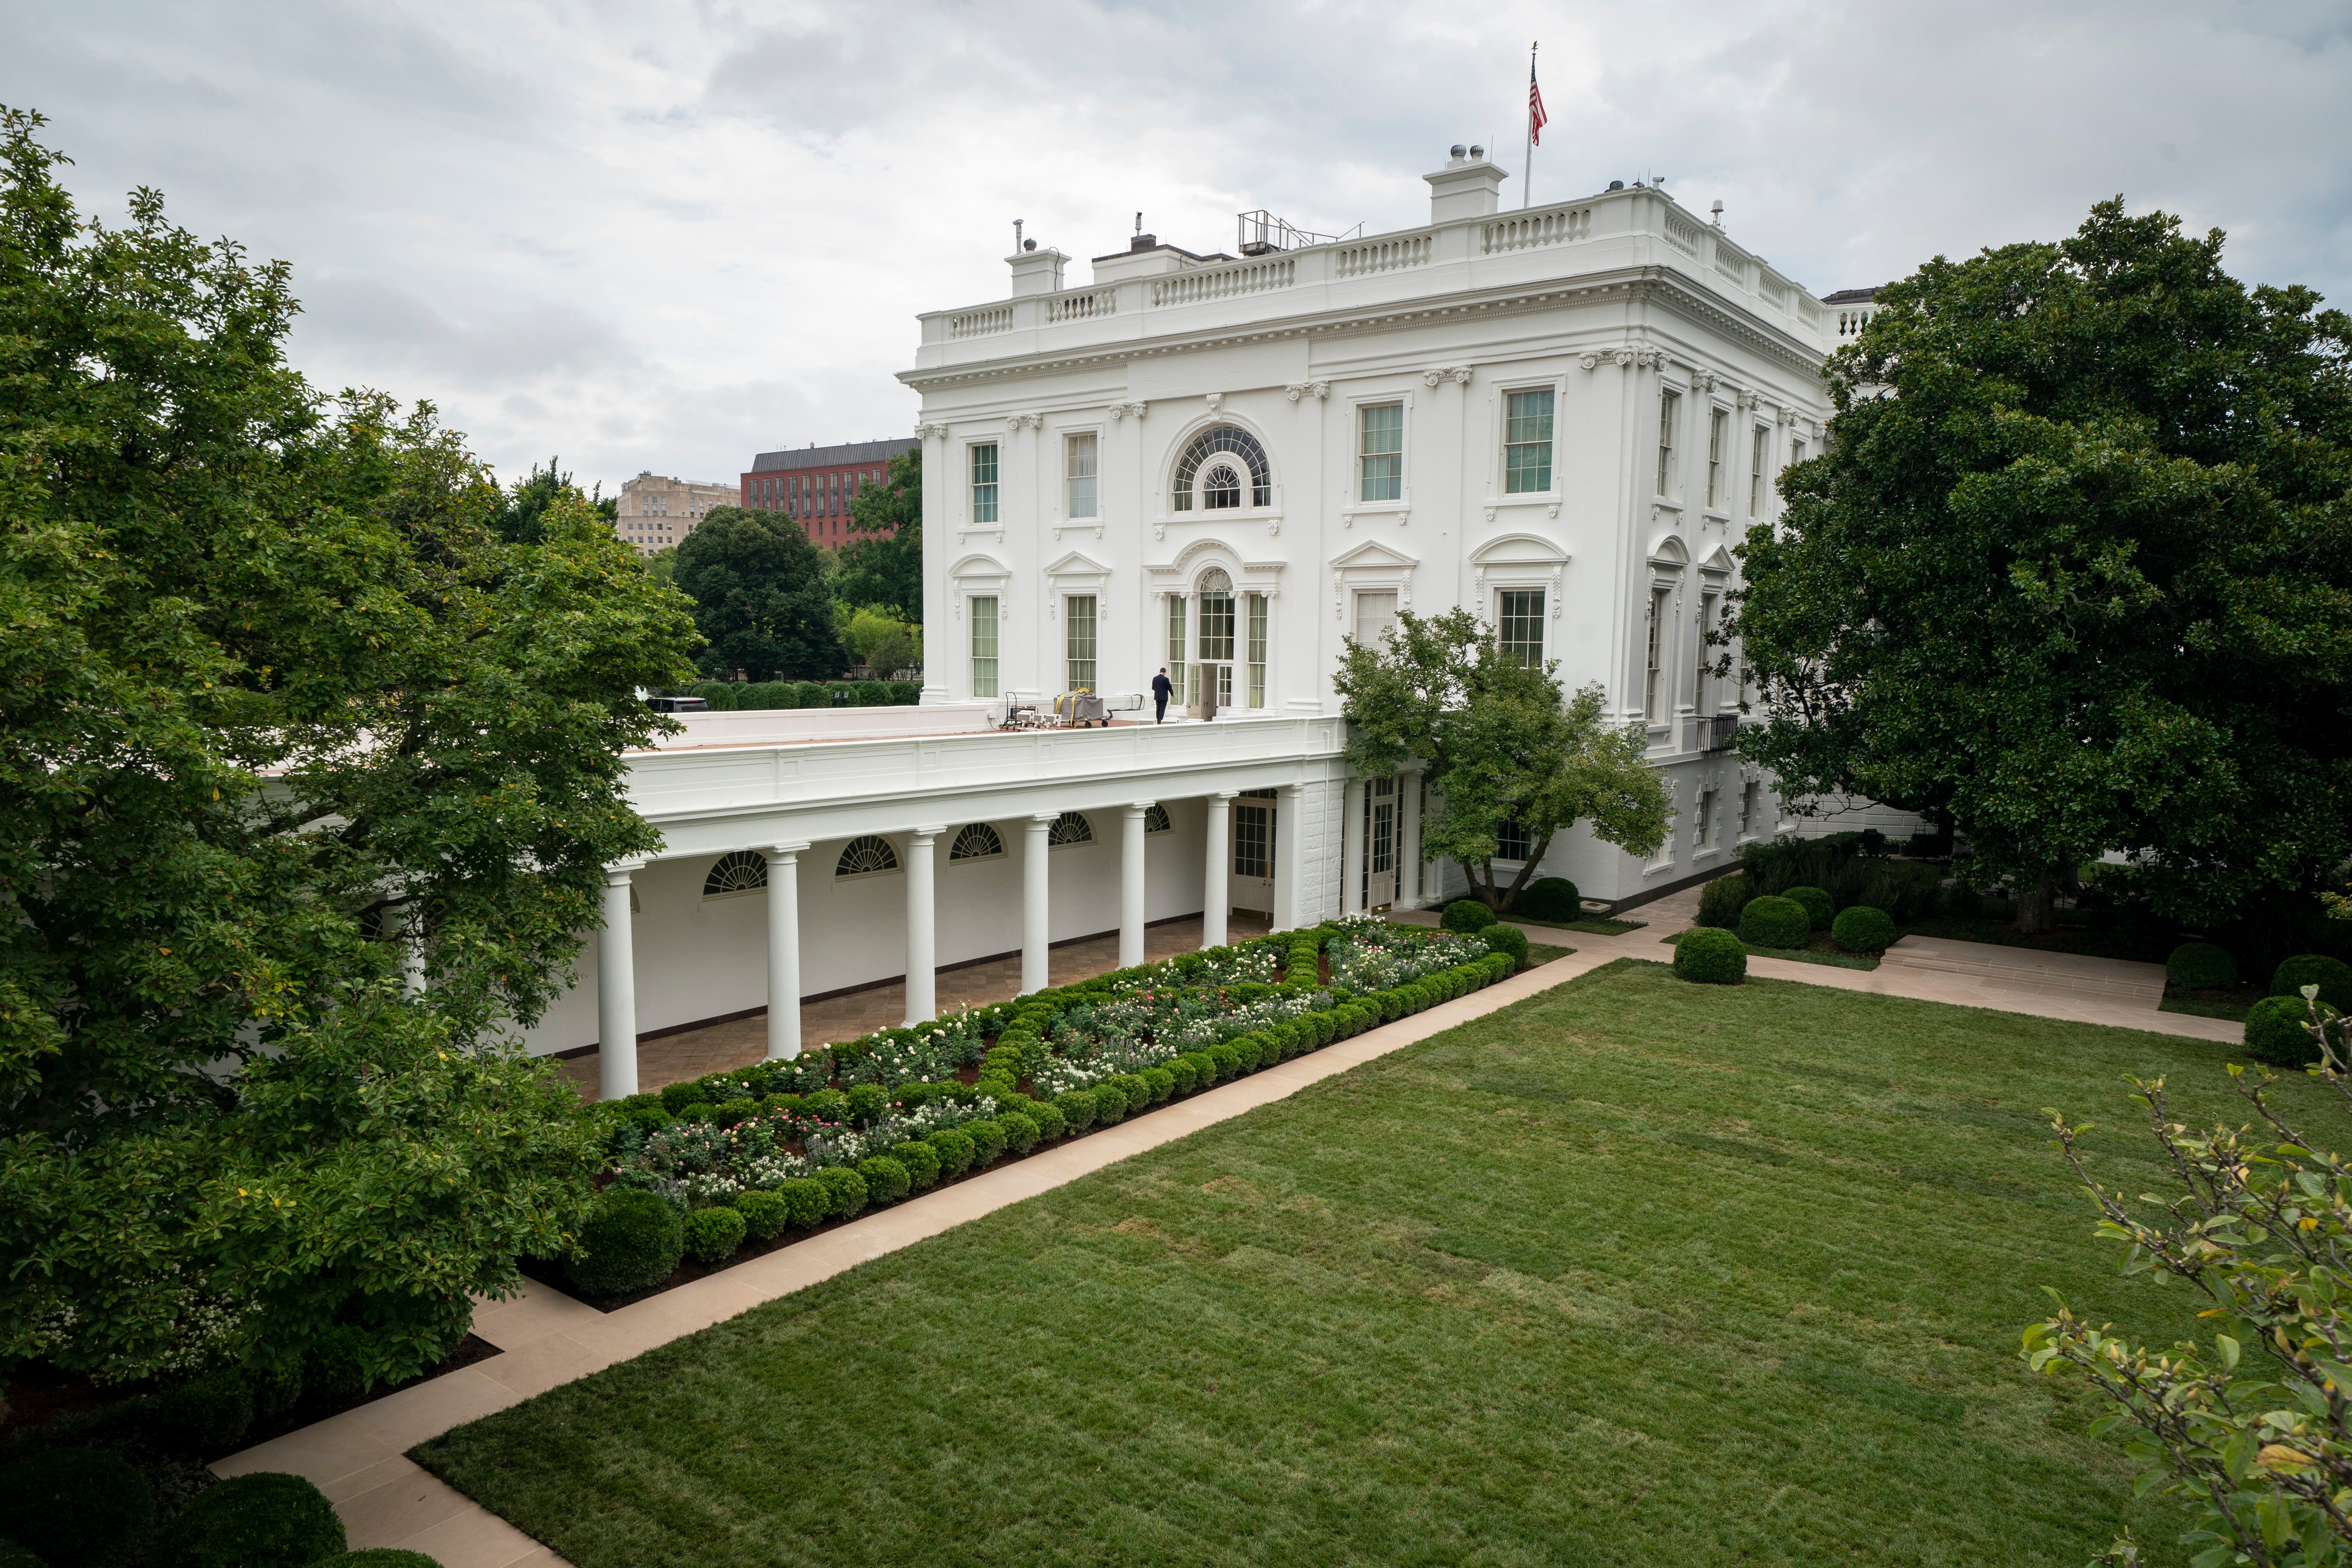 A view of the renovated Rose Garden at the White House